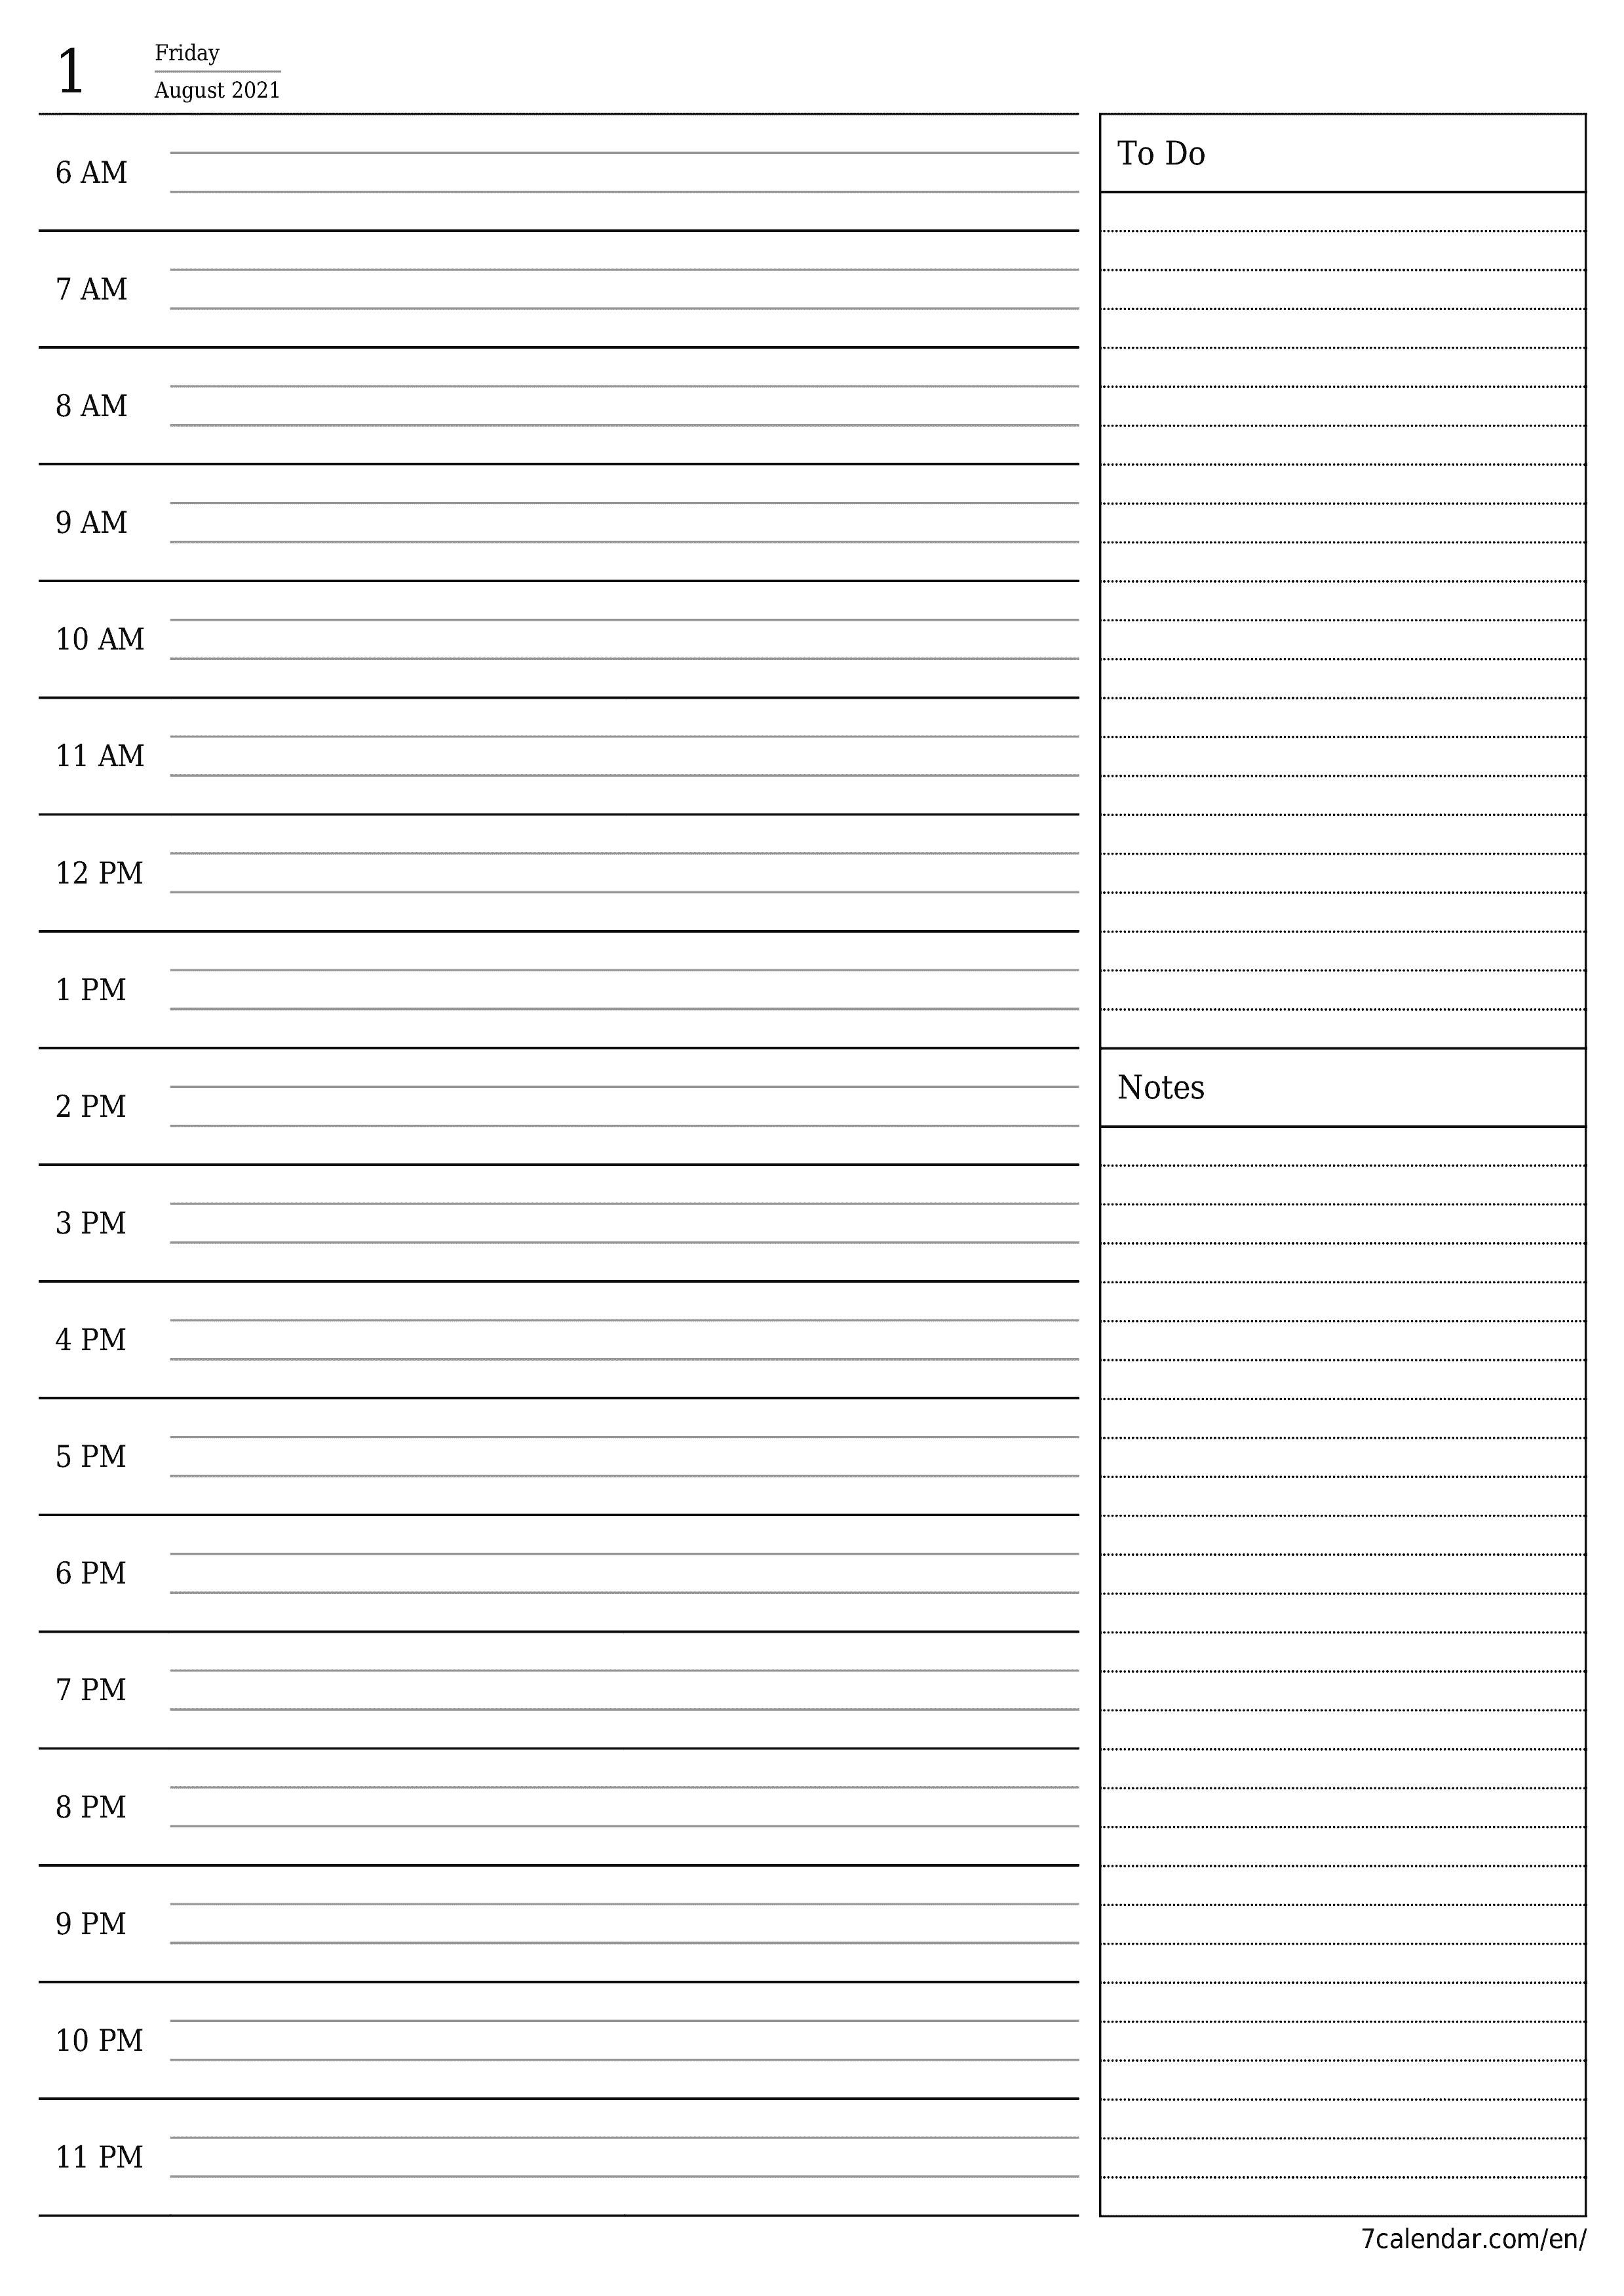 Blank daily printable calendar and planner for day August 2021 with notes, save and print to PDF PNG English